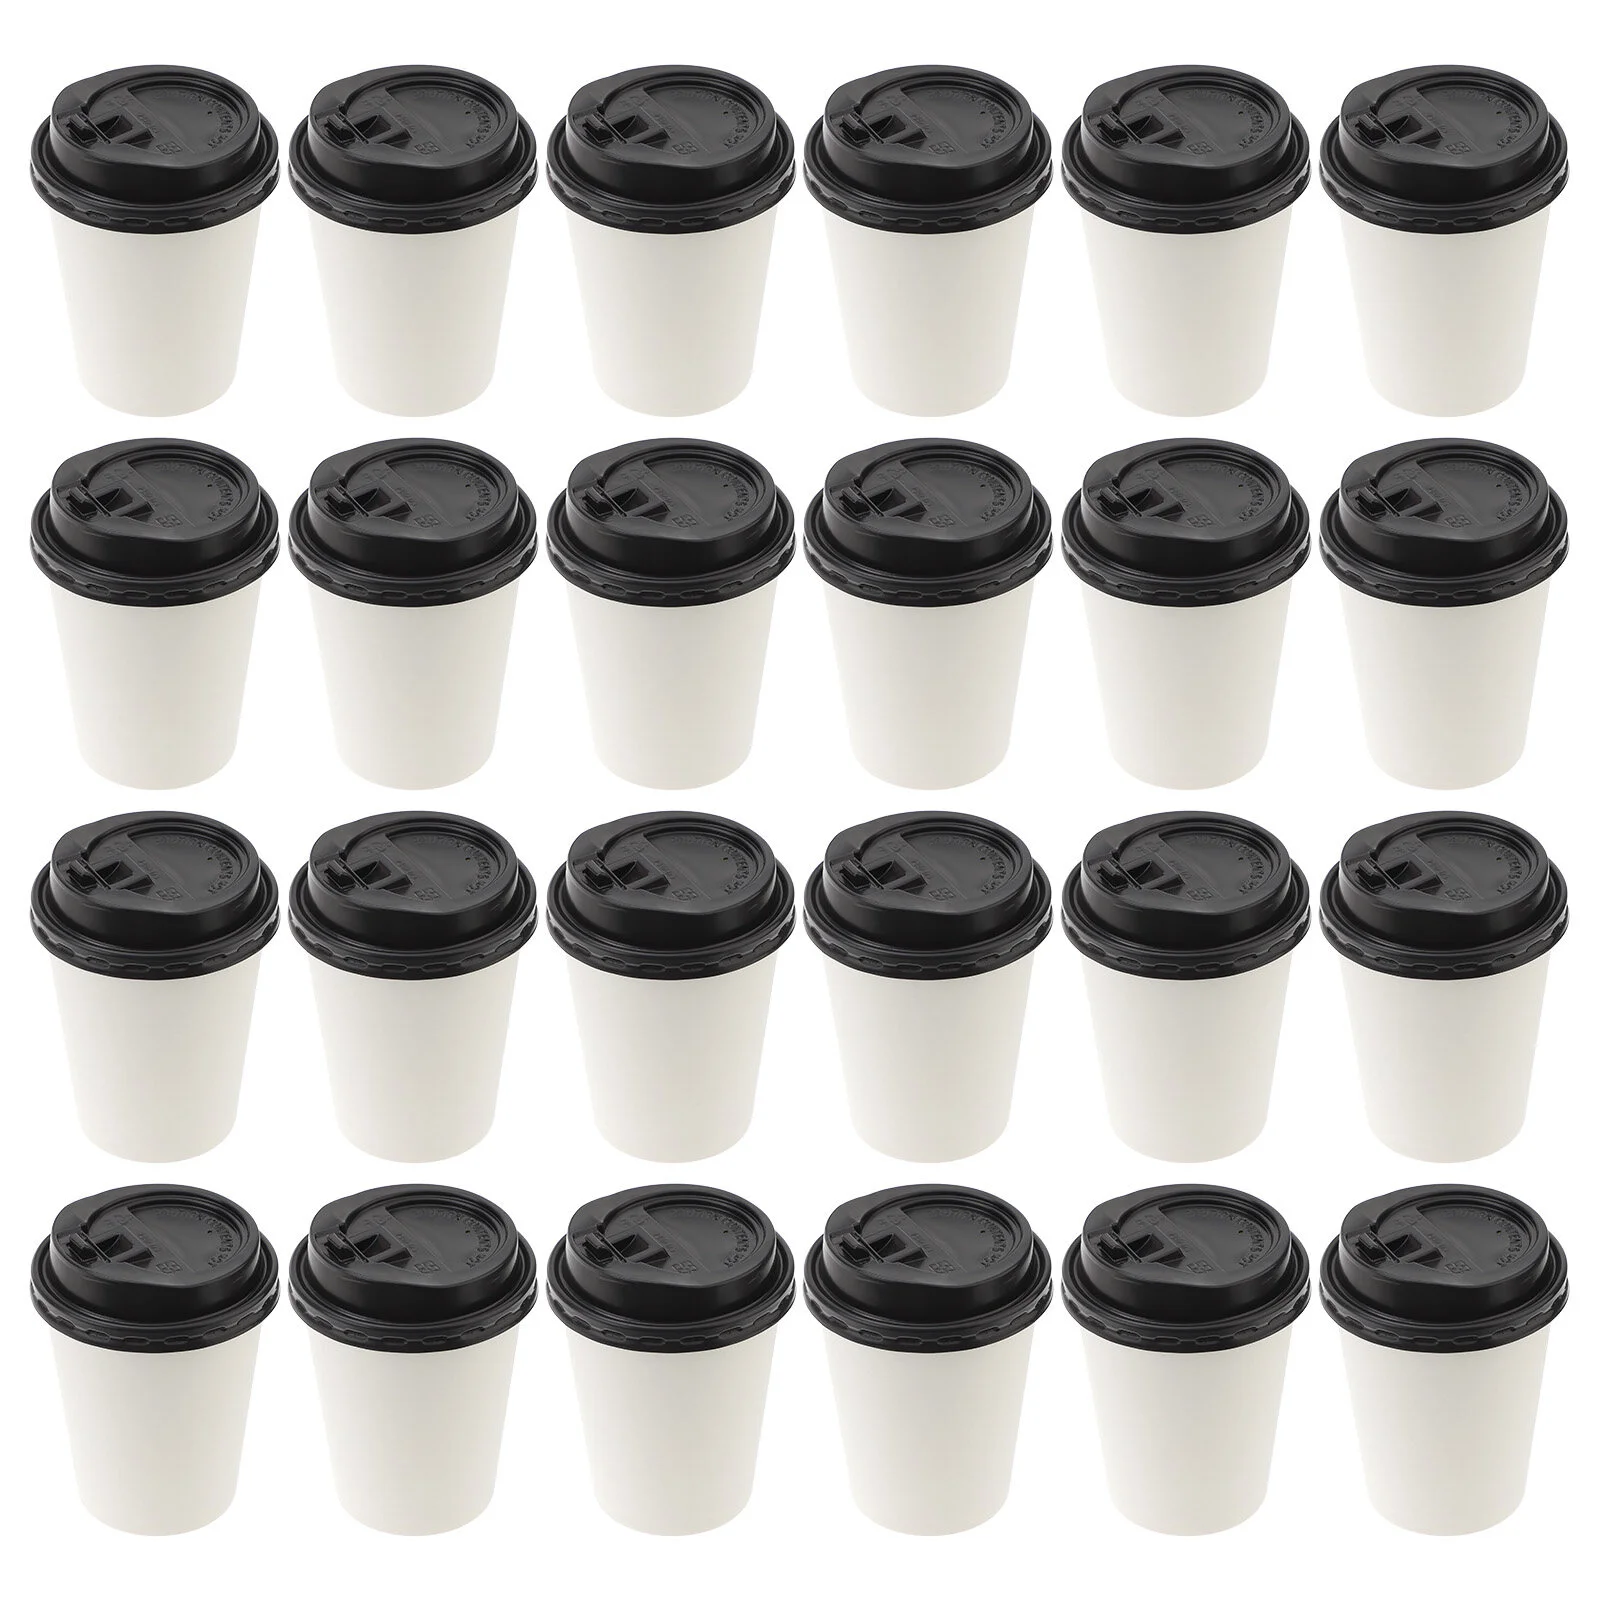 

50pcs Disposable Coffee Cups Insulation Takeaway Double-layer Paper Cup with Lid (8oz, 280ml)